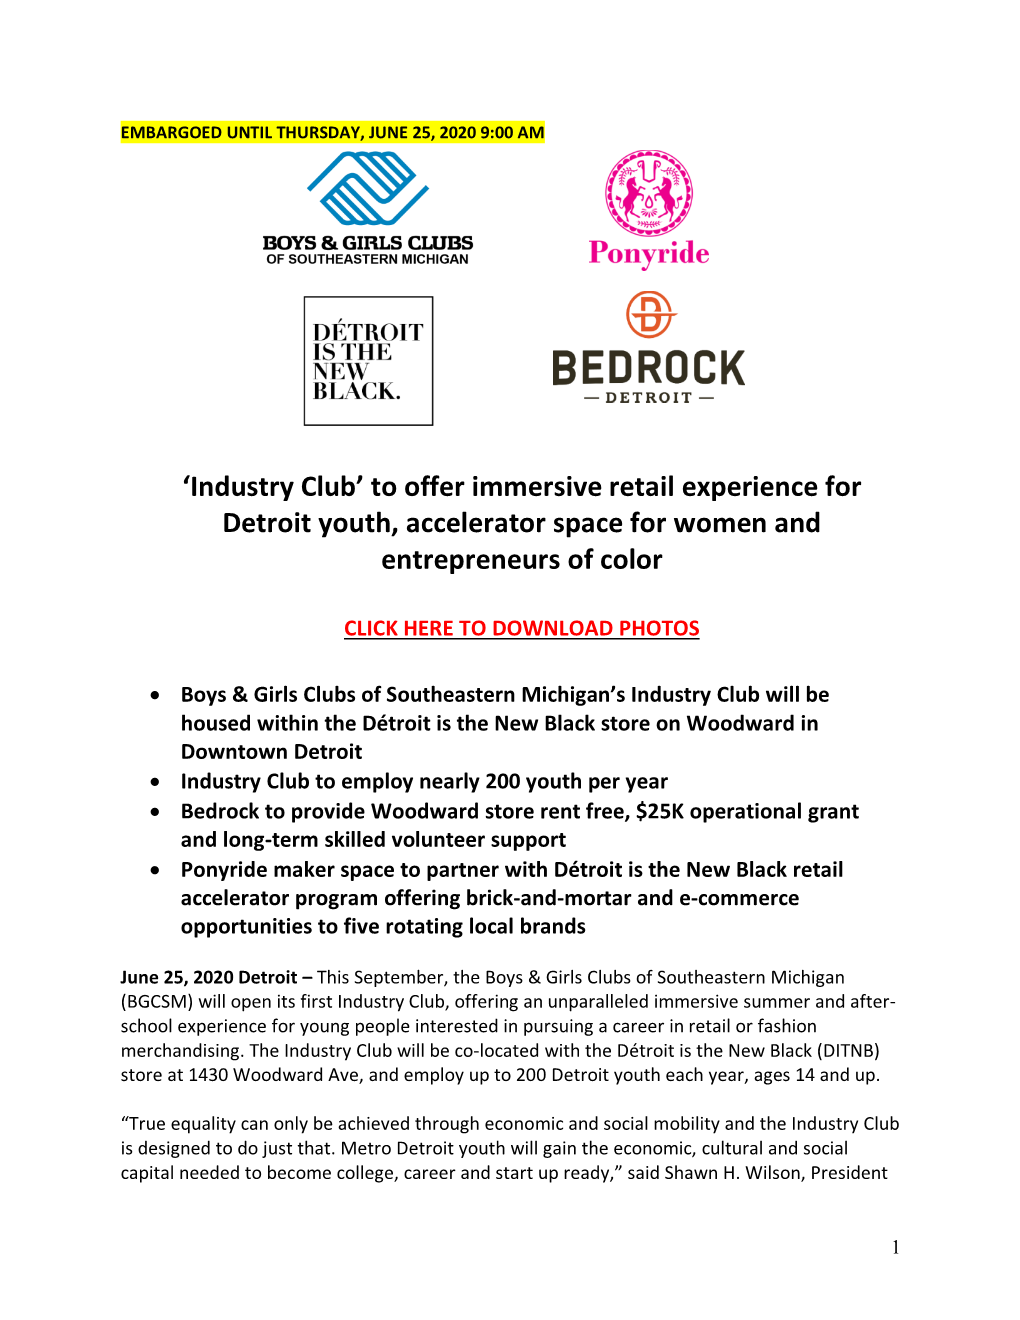 'Industry Club' to Offer Immersive Retail Experience for Detroit Youth, Accelerator Space for Women and Entrepreneurs Of